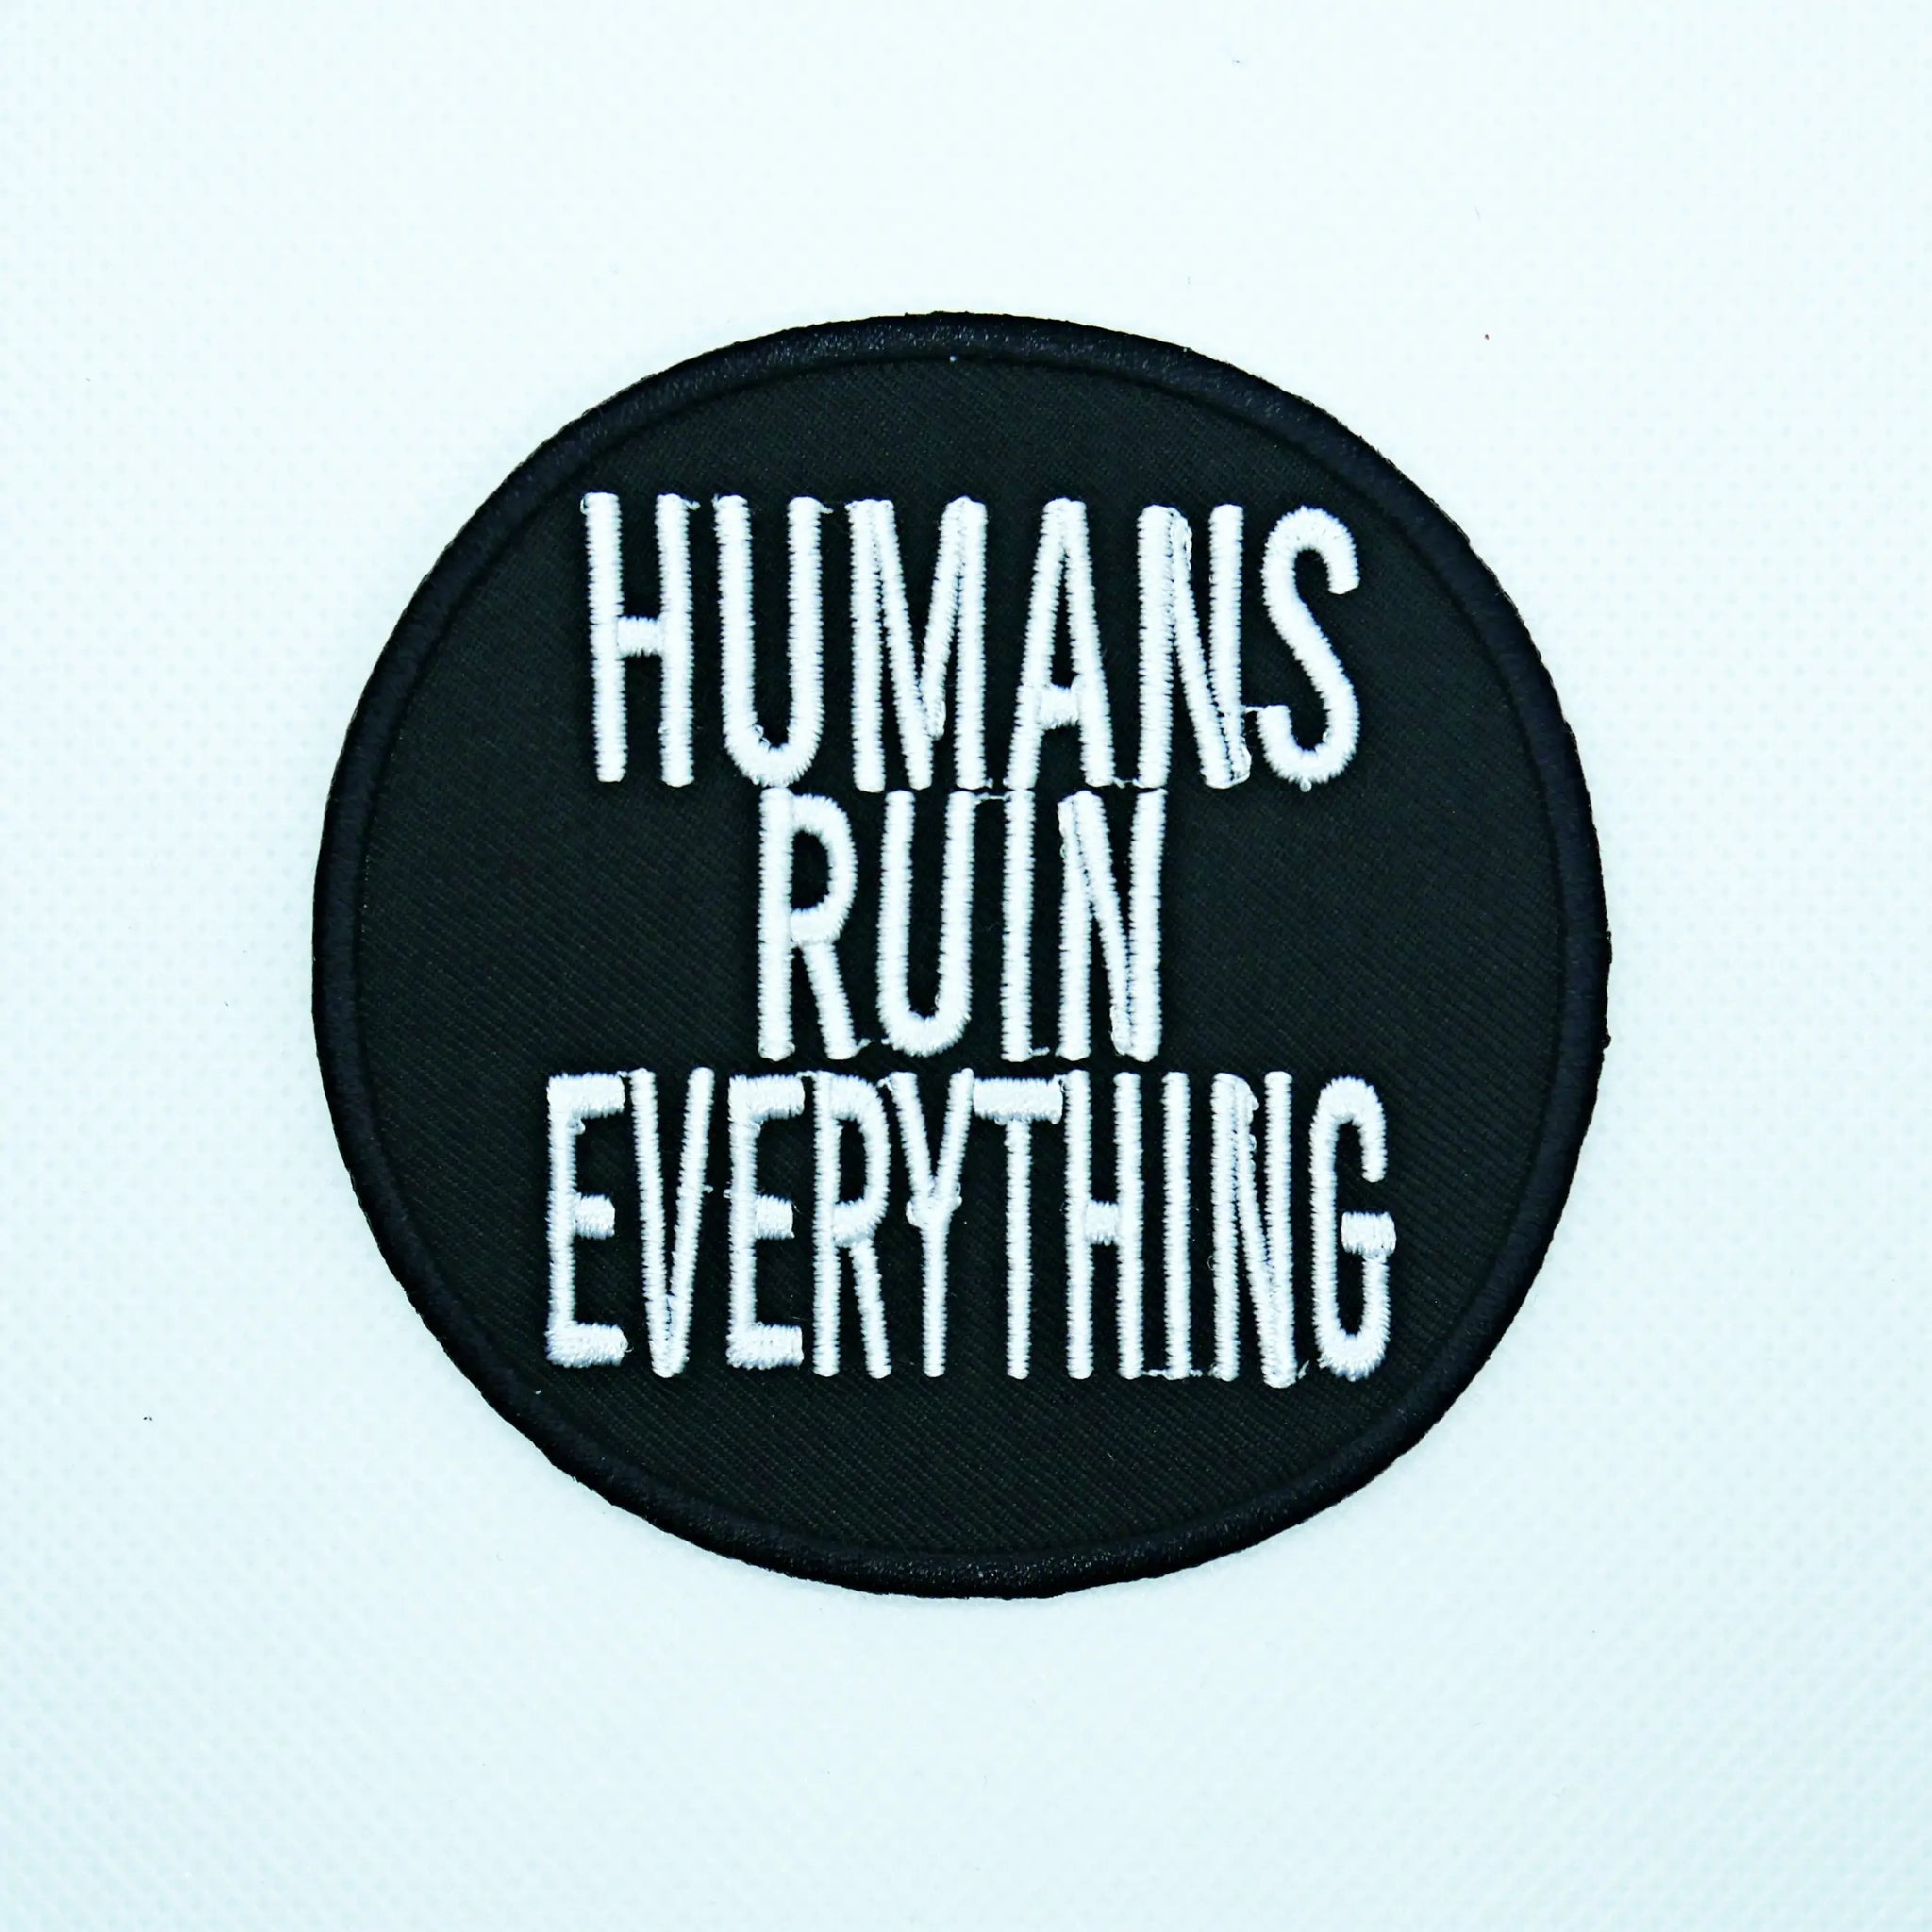 Round embroidered patch with the phrase “HUMANS RUIN EVERYTHING” in white capital letters on a black background